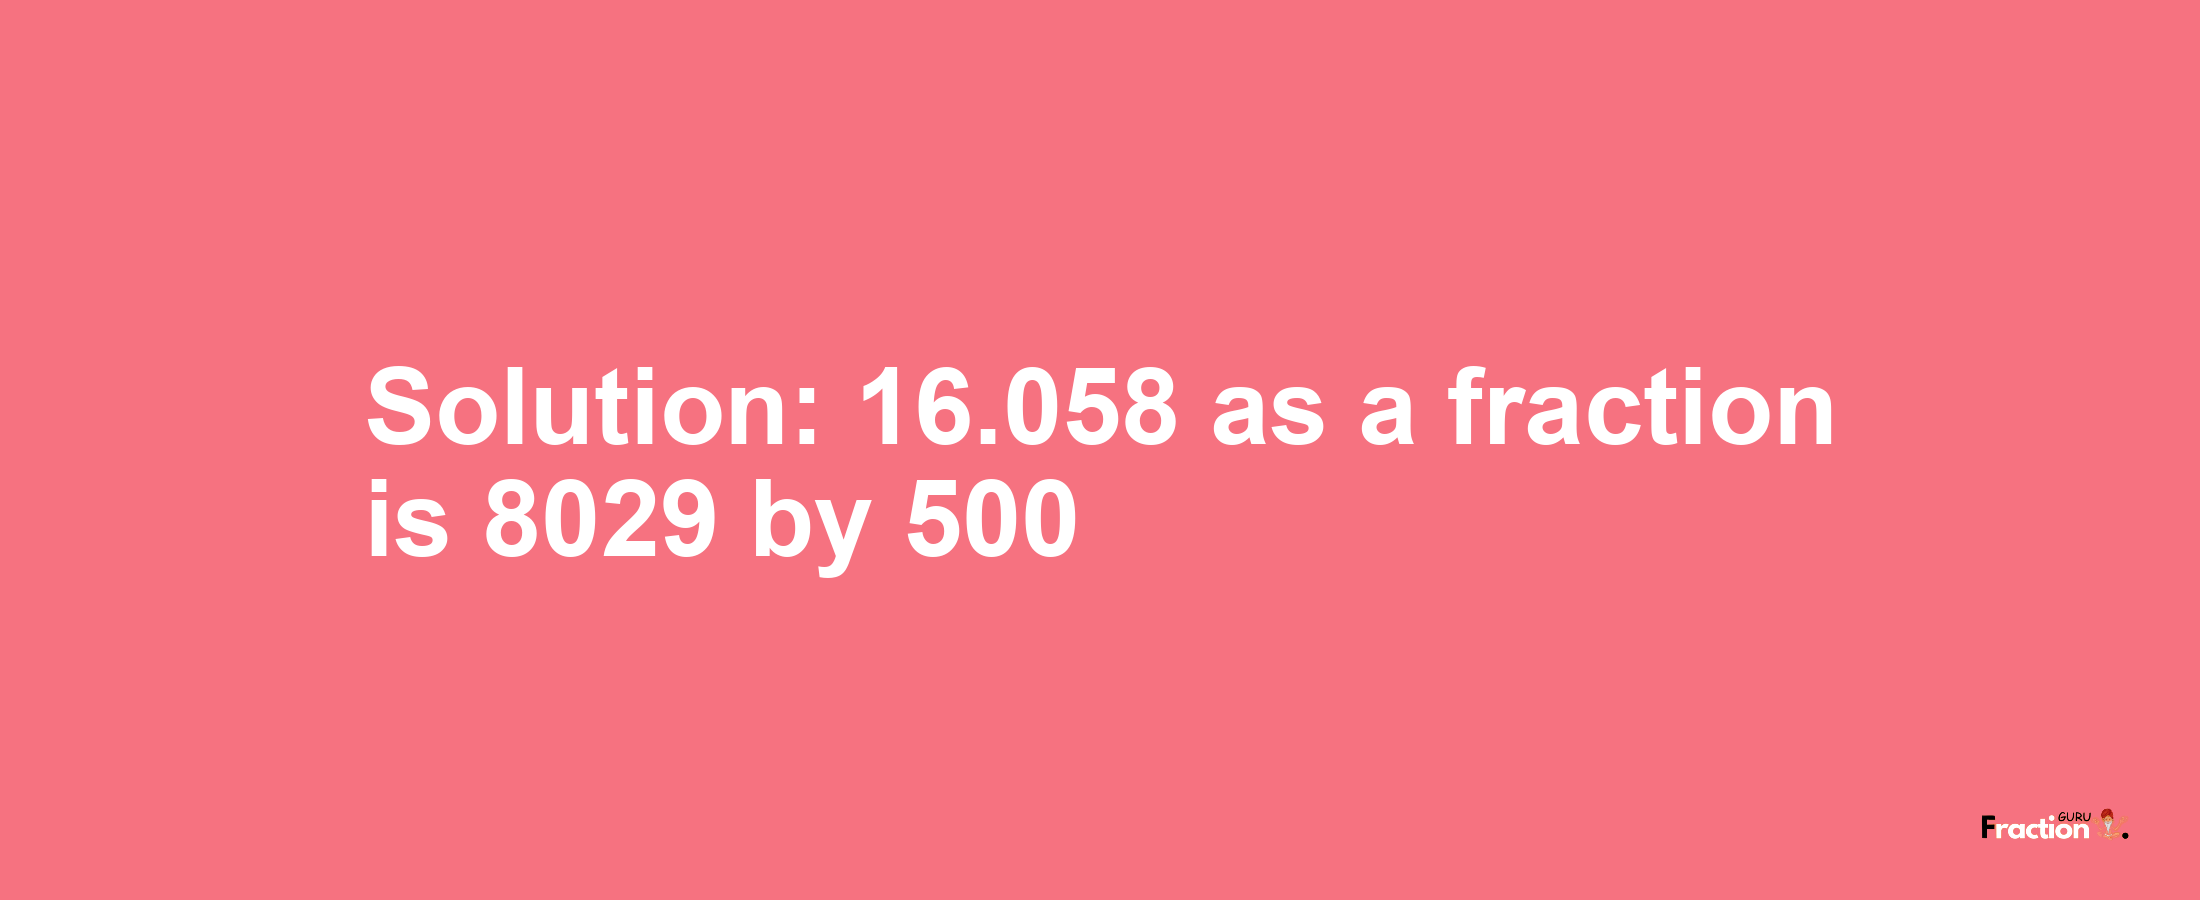 Solution:16.058 as a fraction is 8029/500